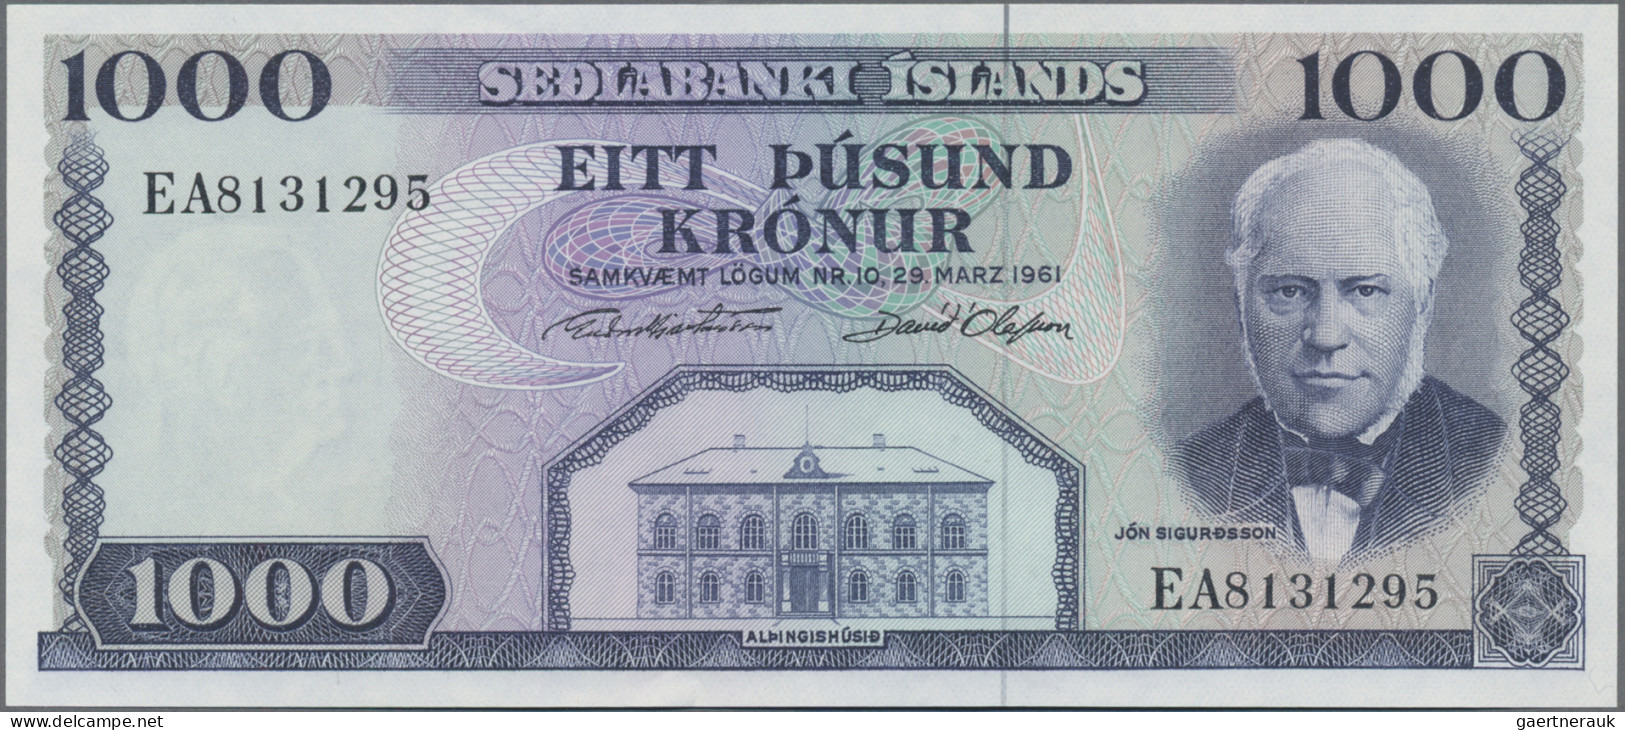 Iceland: Central Bank of Iceland, lot with 4 banknotes, comprising 1.000 and 5.0